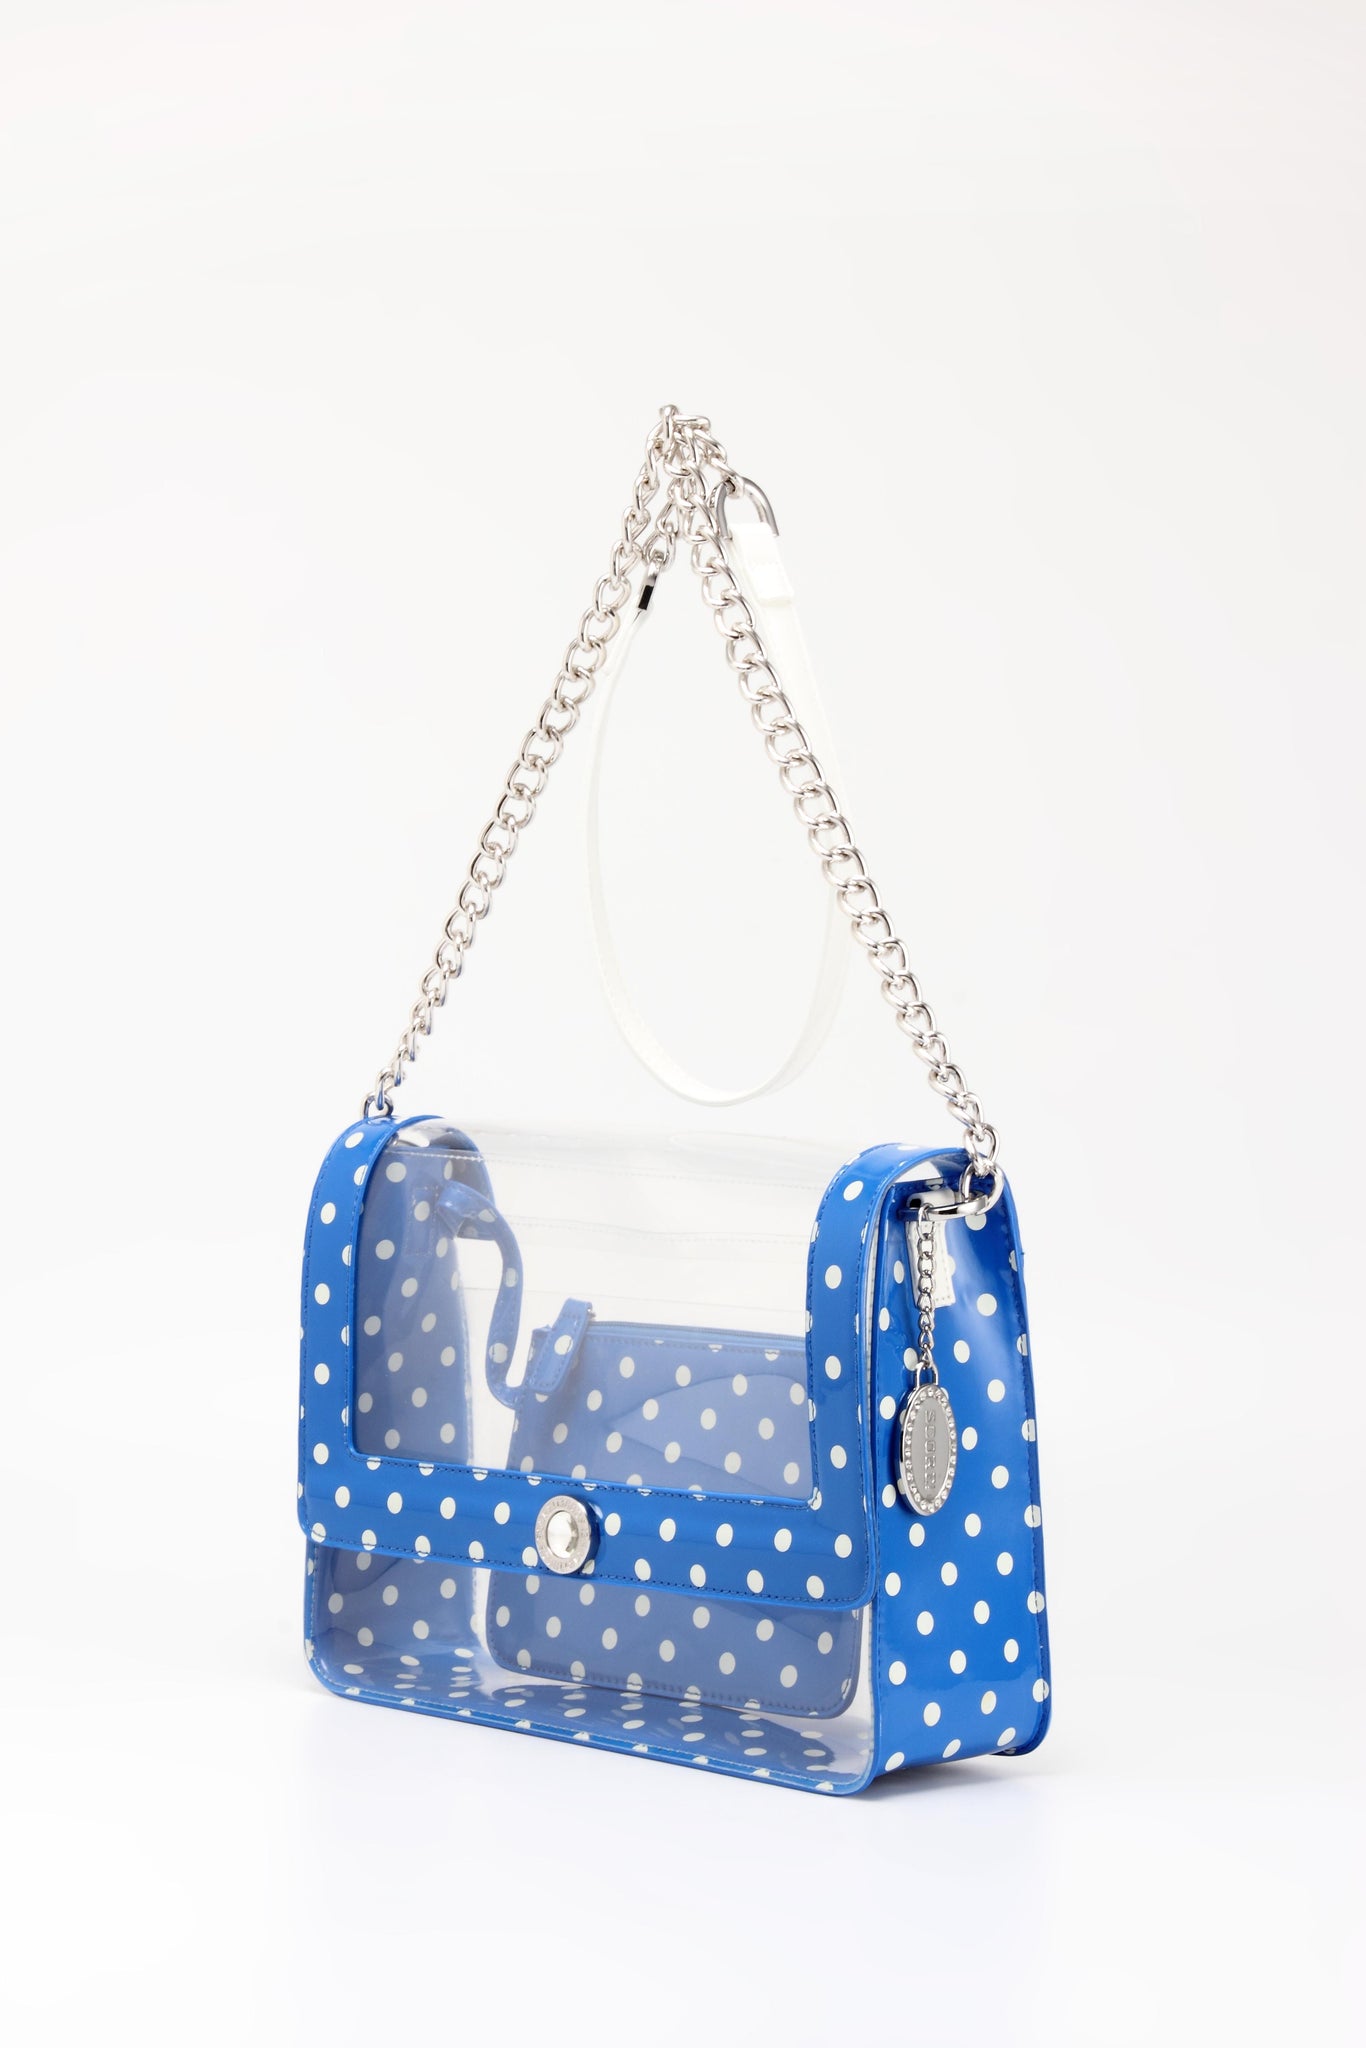 St. Louis Blues Stadium Clear Tote